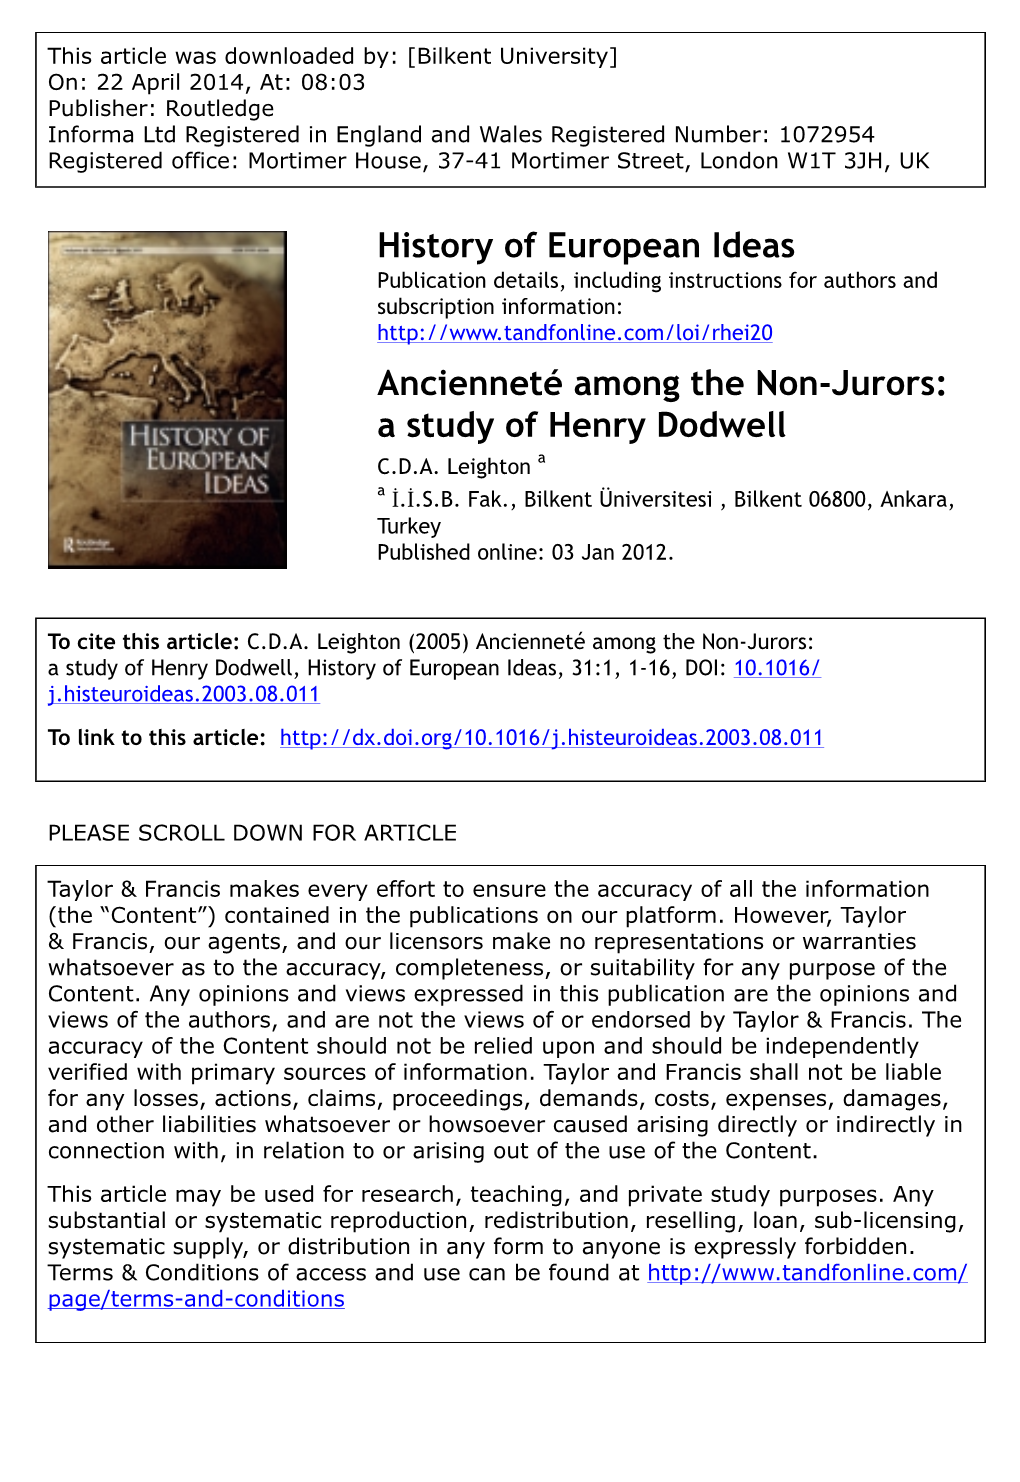 A Study of Henry Dodwell C.D.A